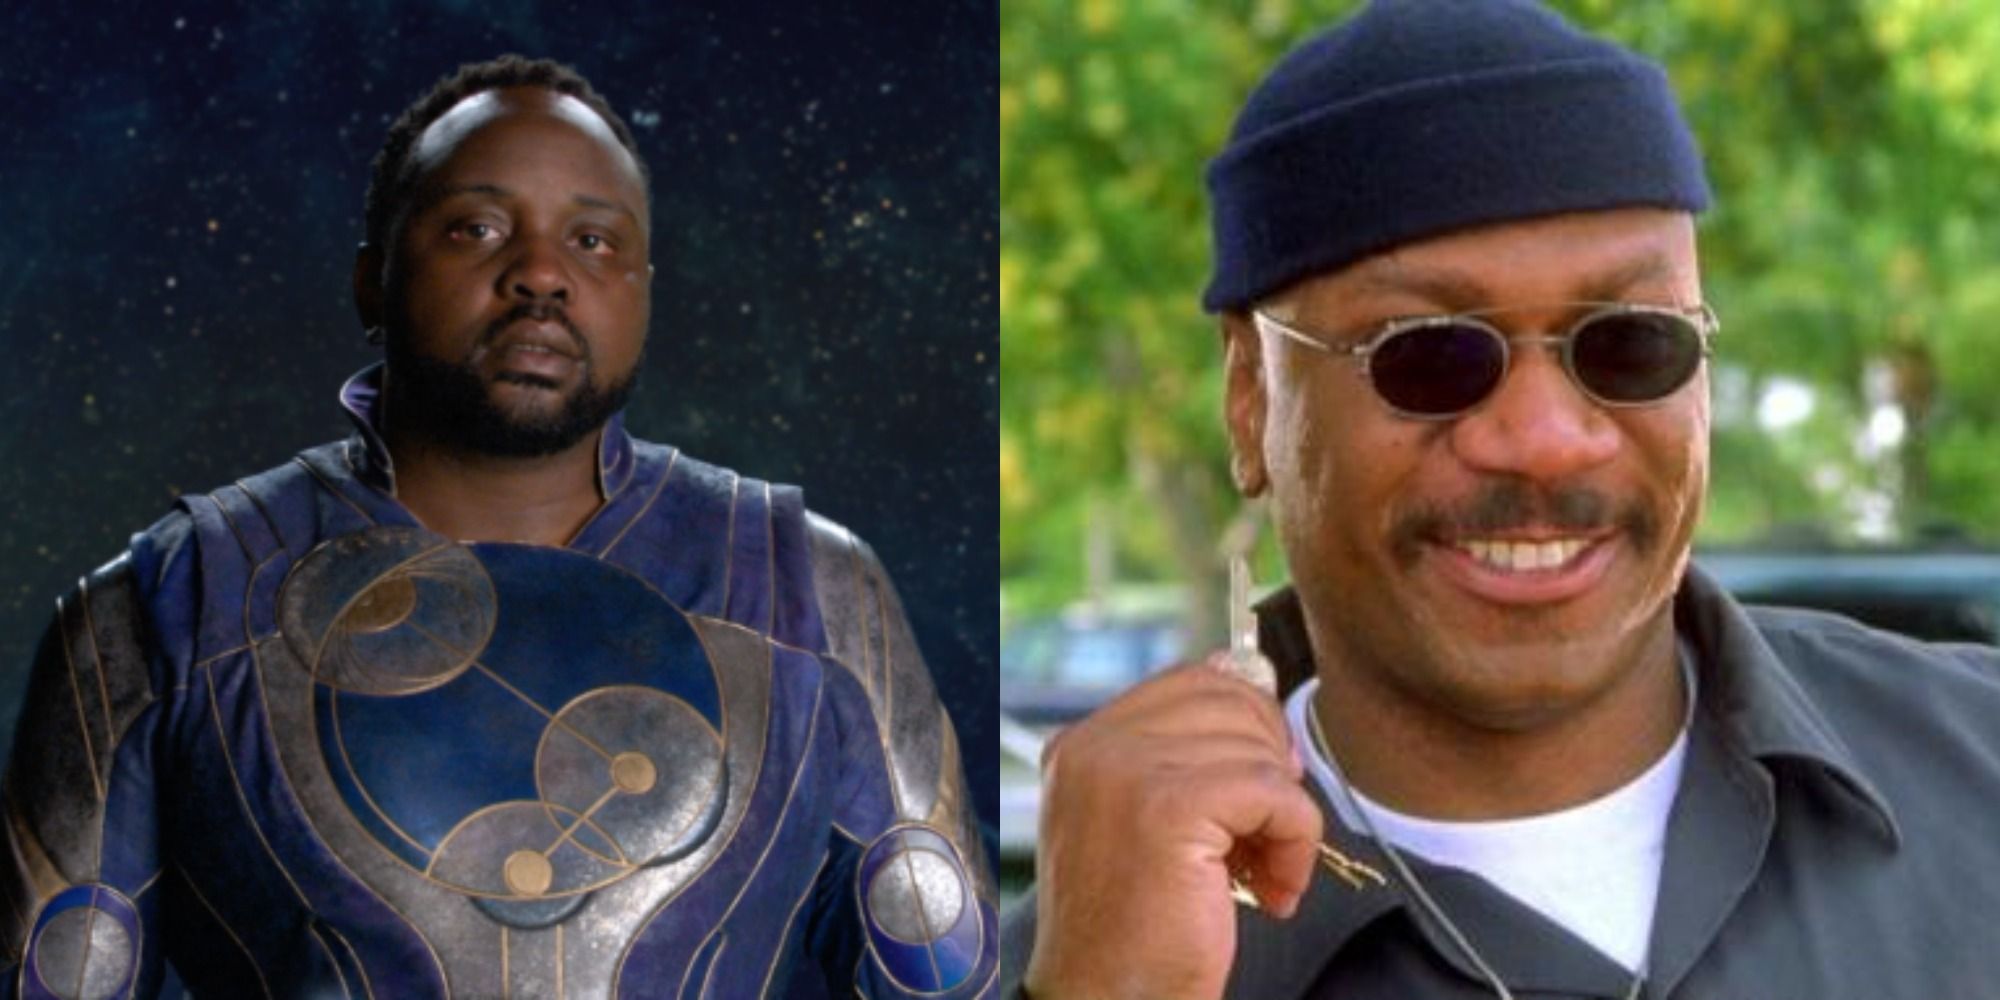 Split image of Brian Tyree Henry as Phastos in Eternals and Ving Rhames in Out of Sight